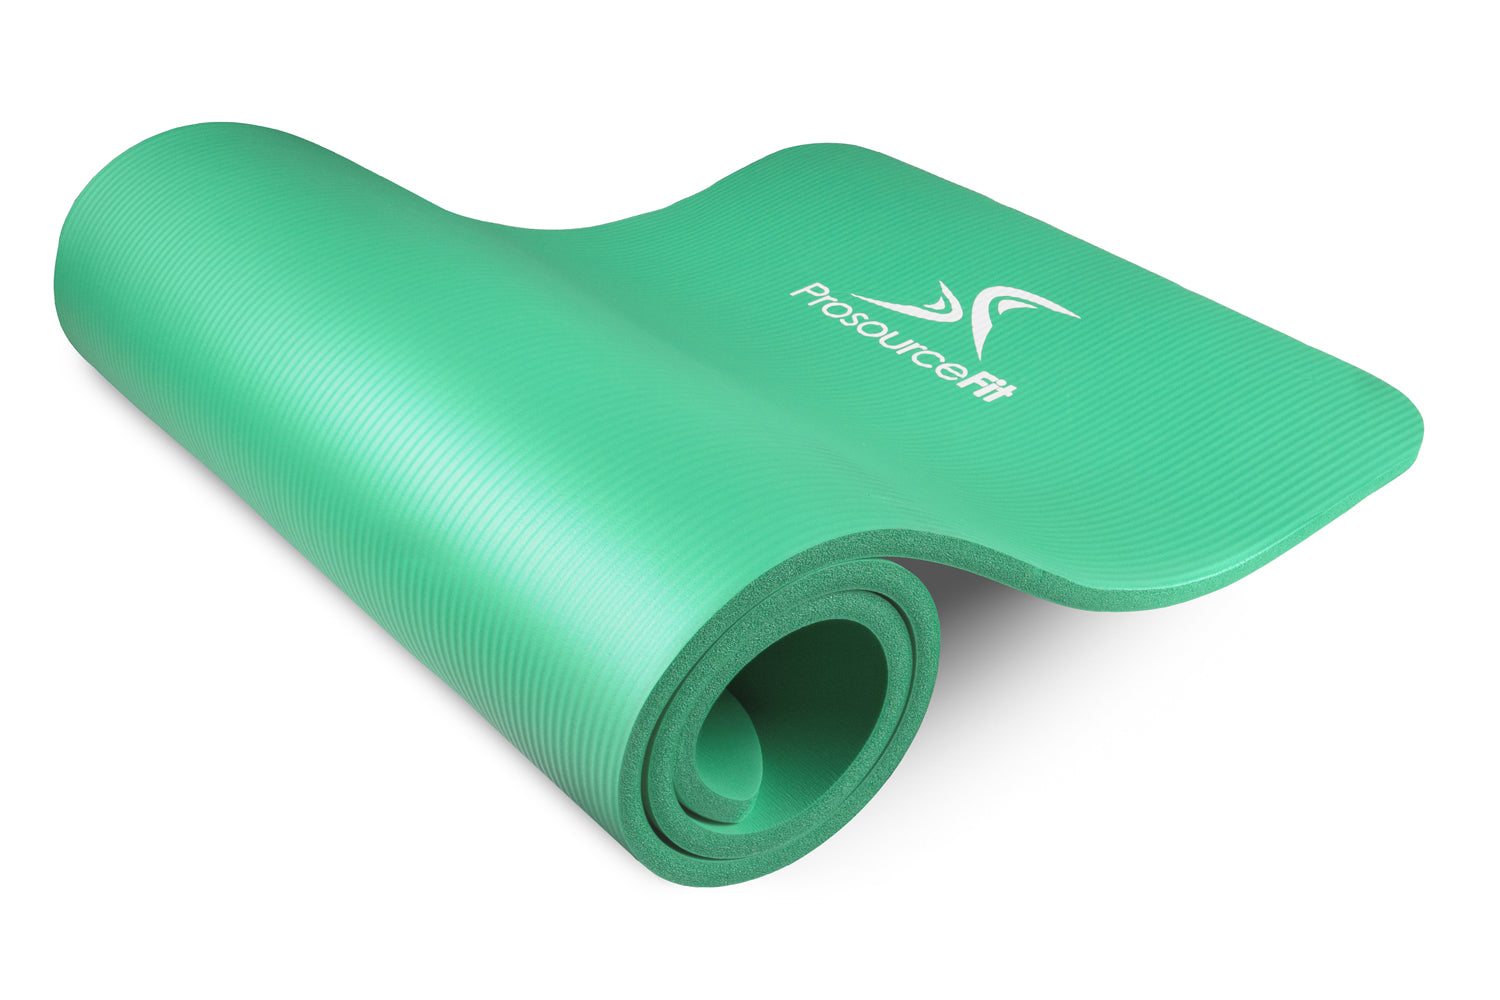 Sturdy And Skidproof 1/2 inch thick yoga mat For Training 